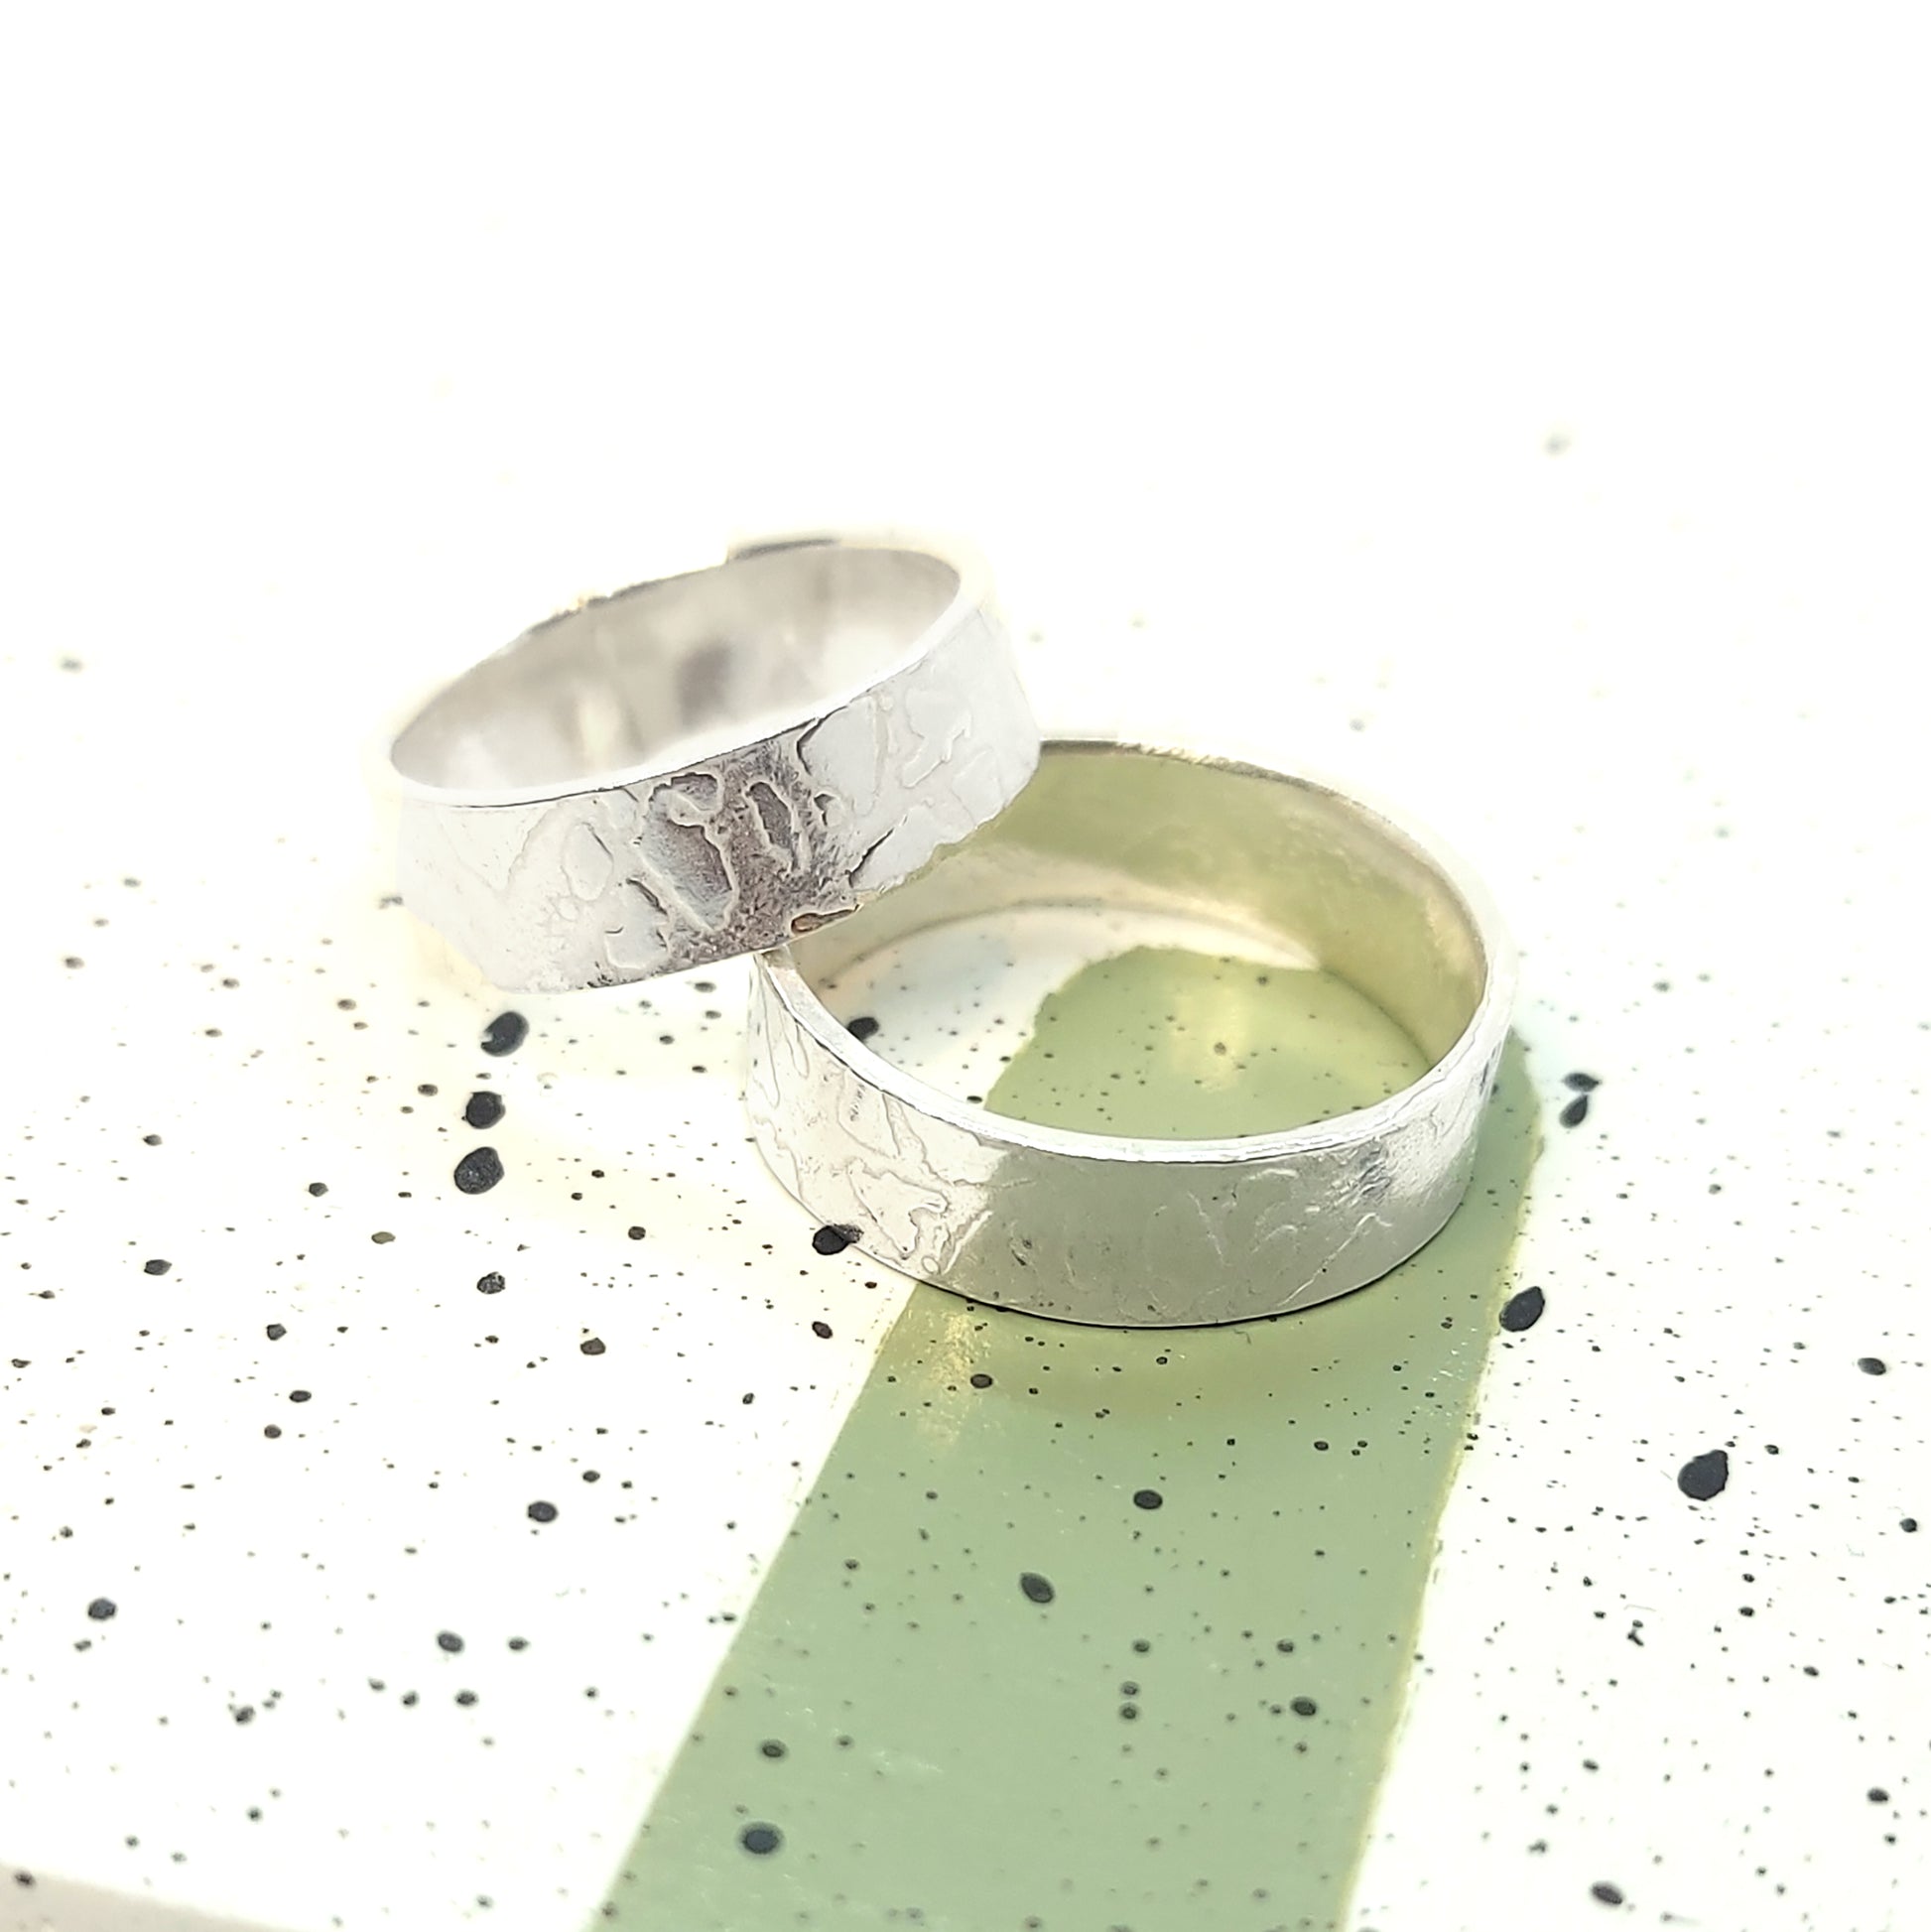 Two silver band rings with islands in the sea style pattern. His and hers.